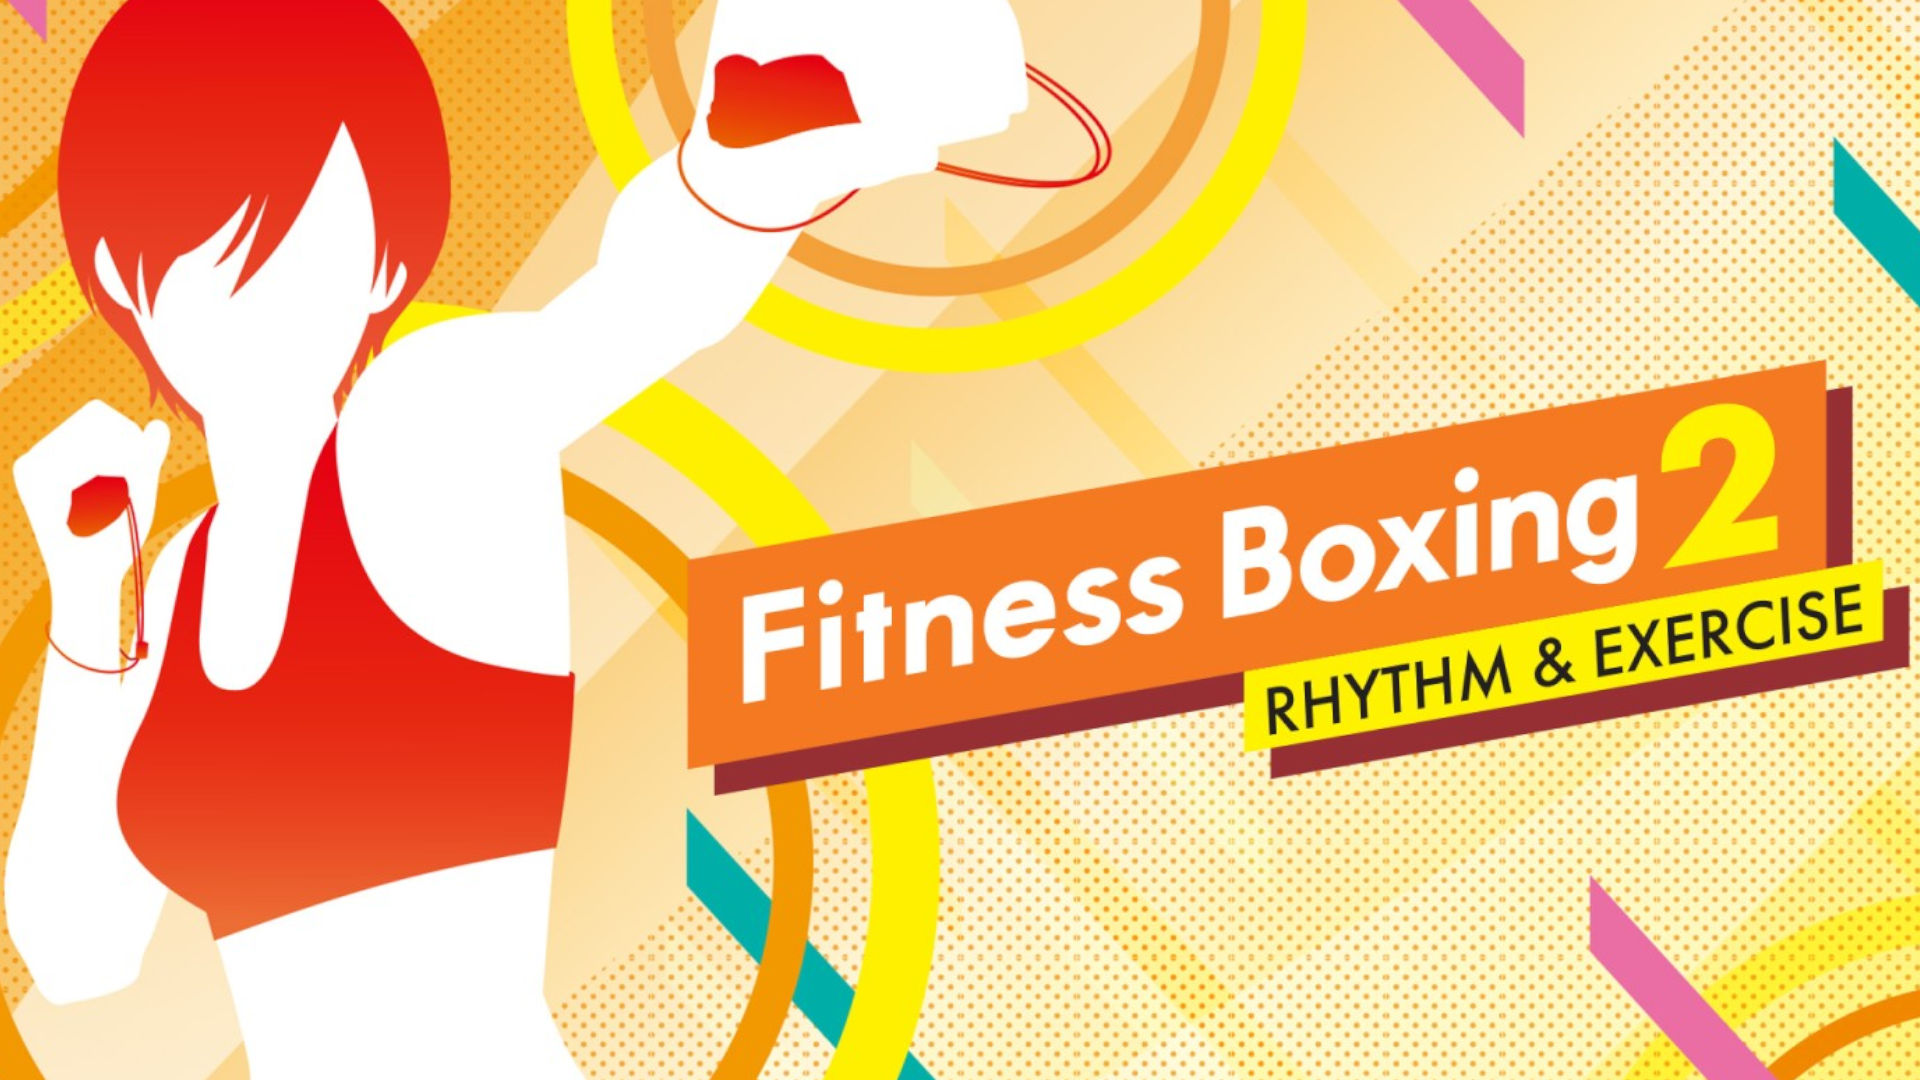 Fitness Boxing 2 cover art with boxing woman